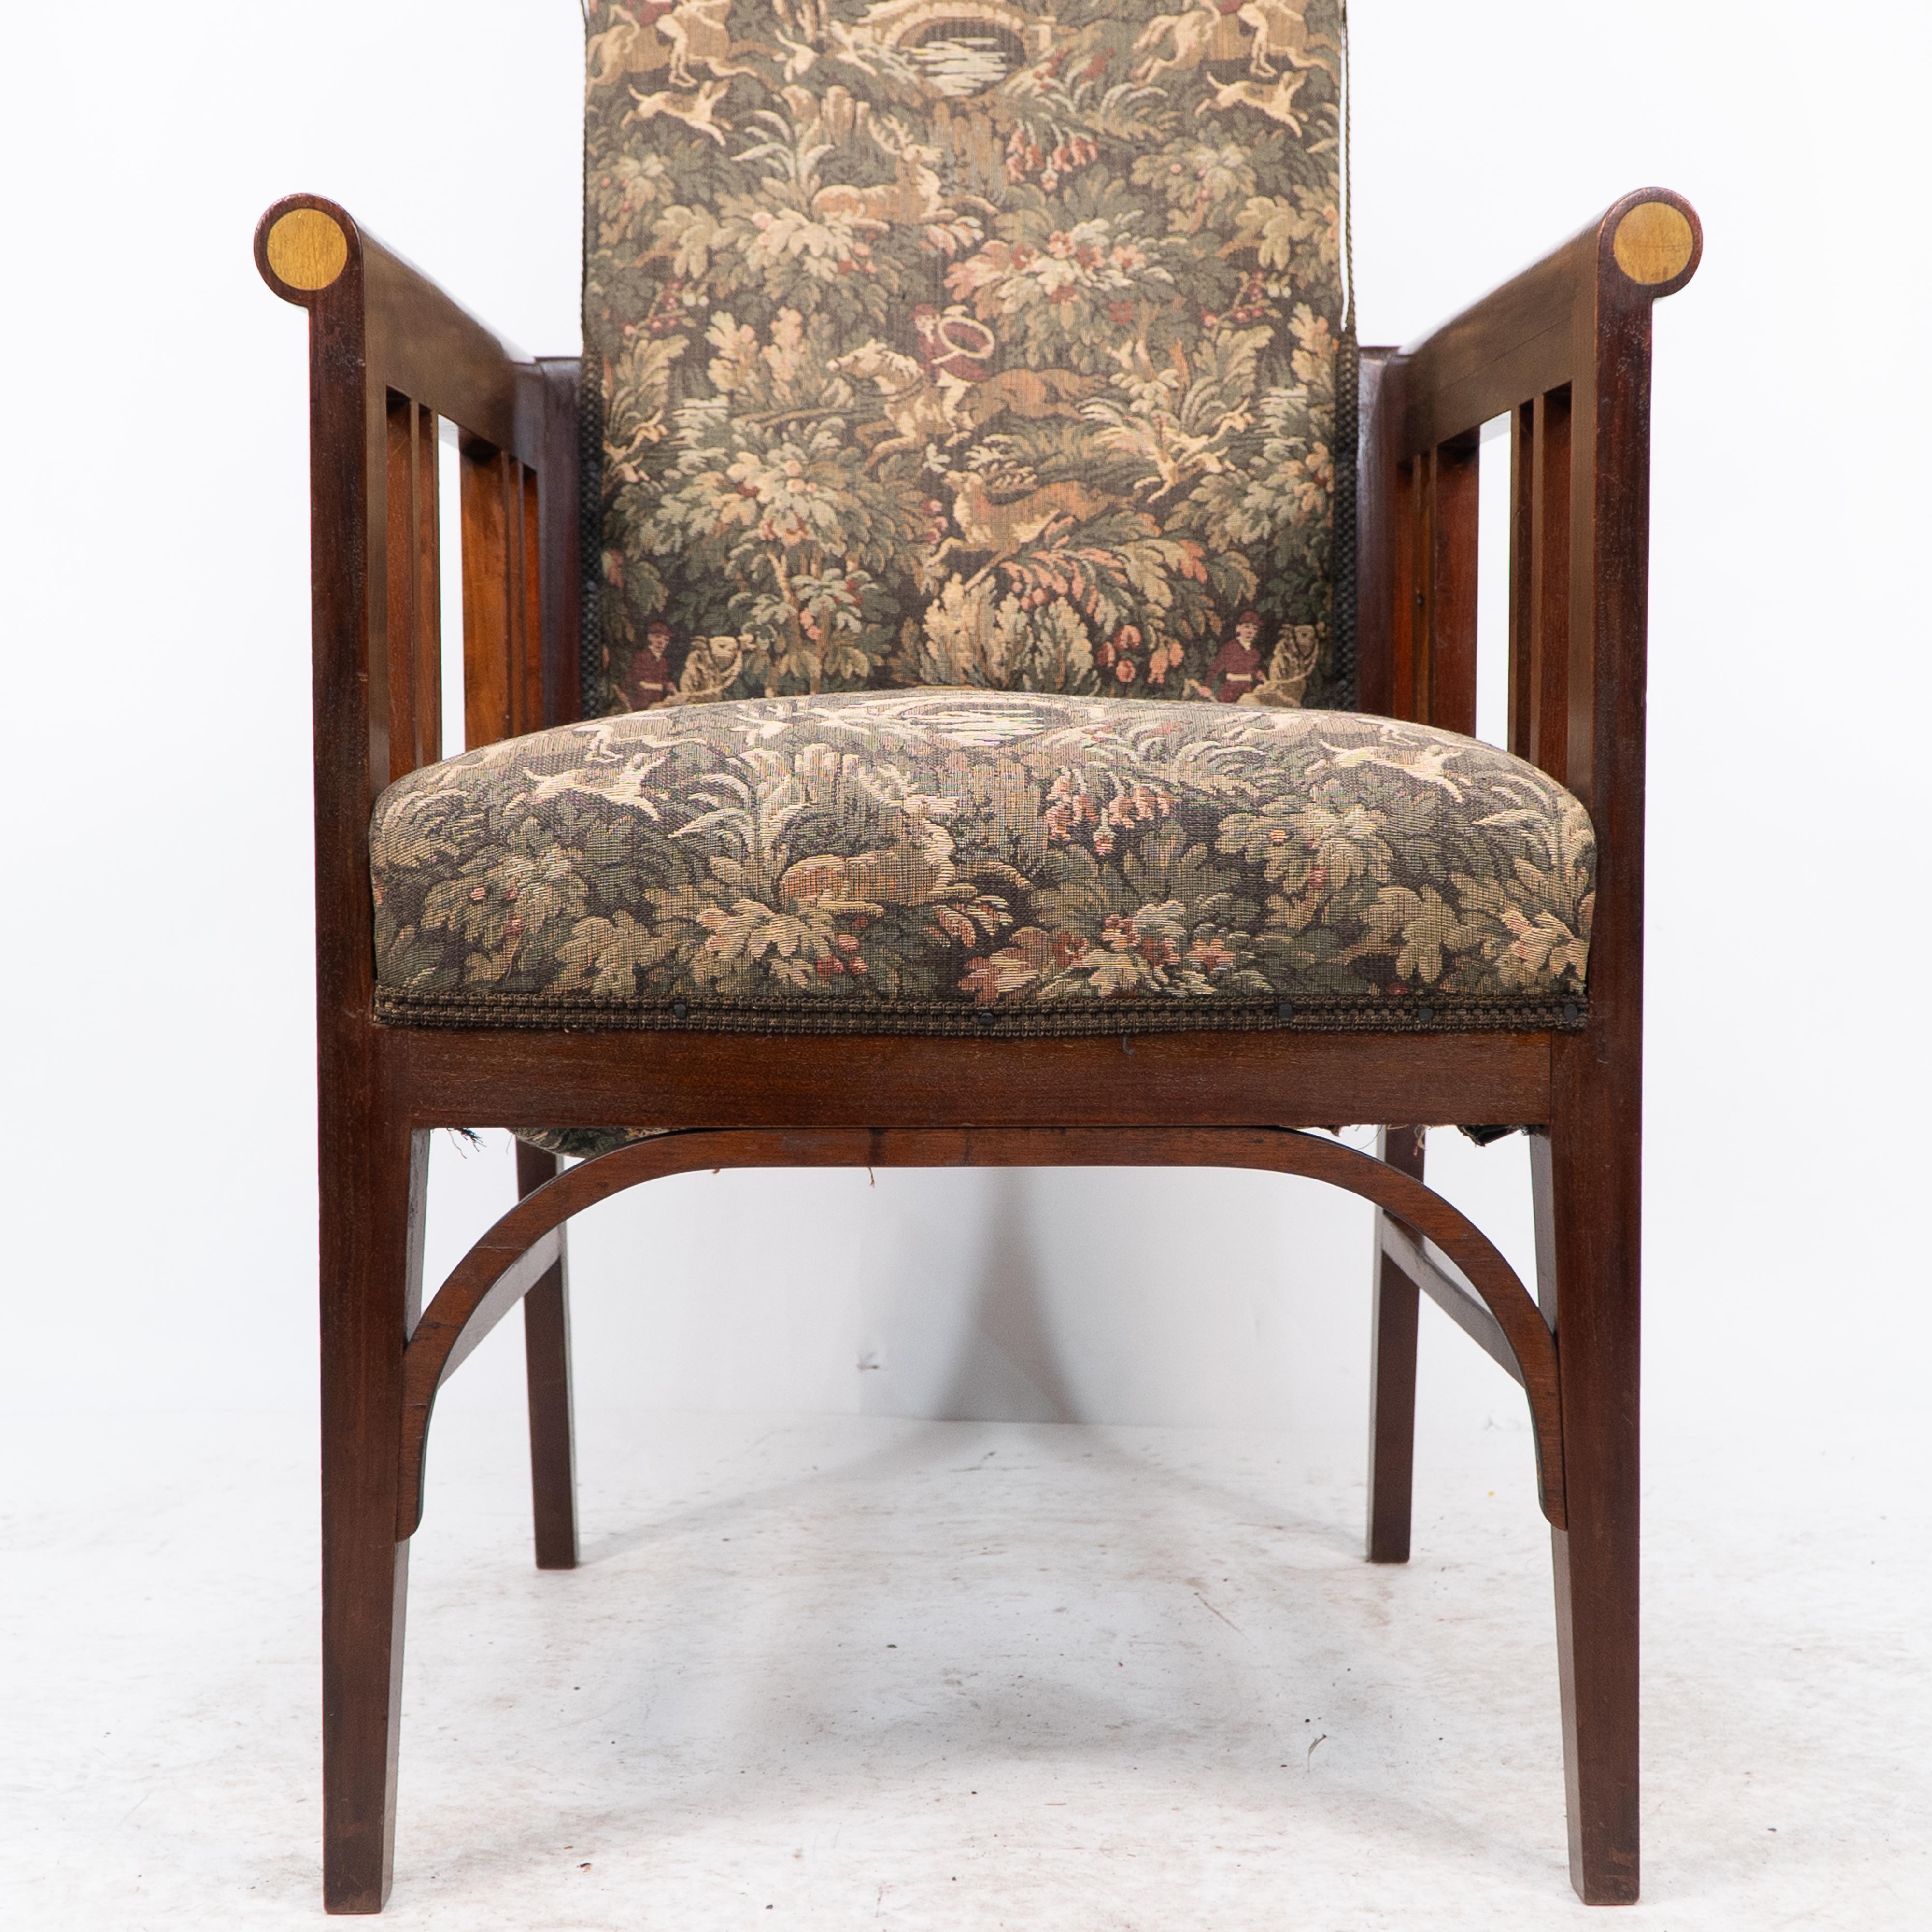 G M Ellwood for J S Henry. A Progressive New Art armchair with fruitwood inlays For Sale 3